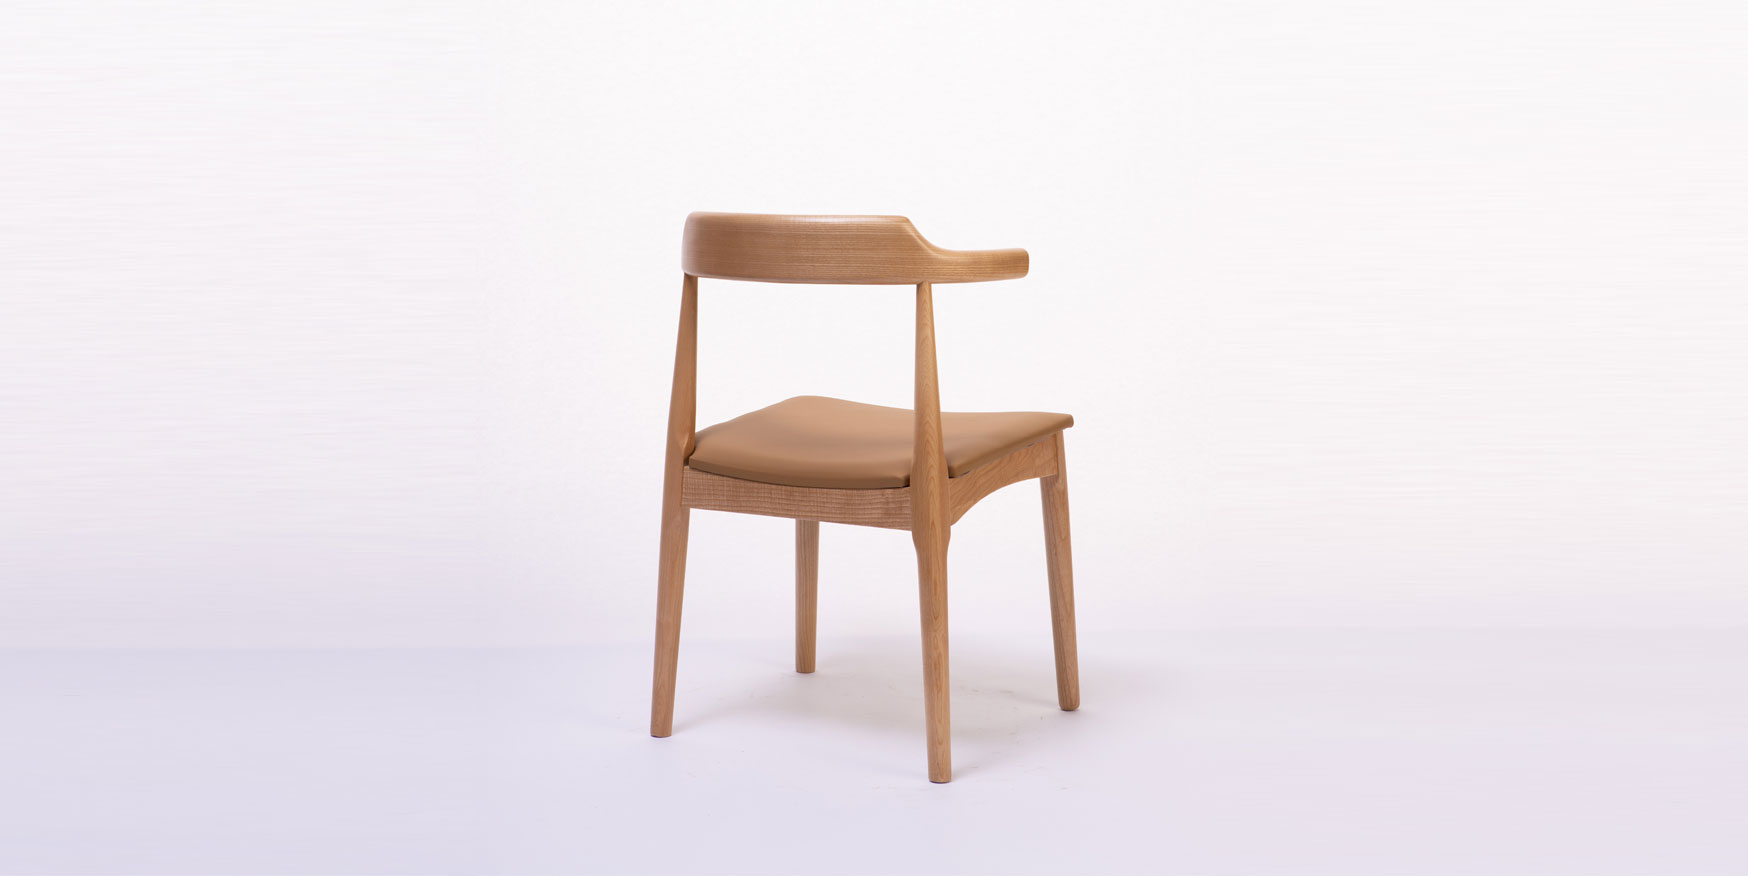 bentwood upholstered wooden dining chairs
